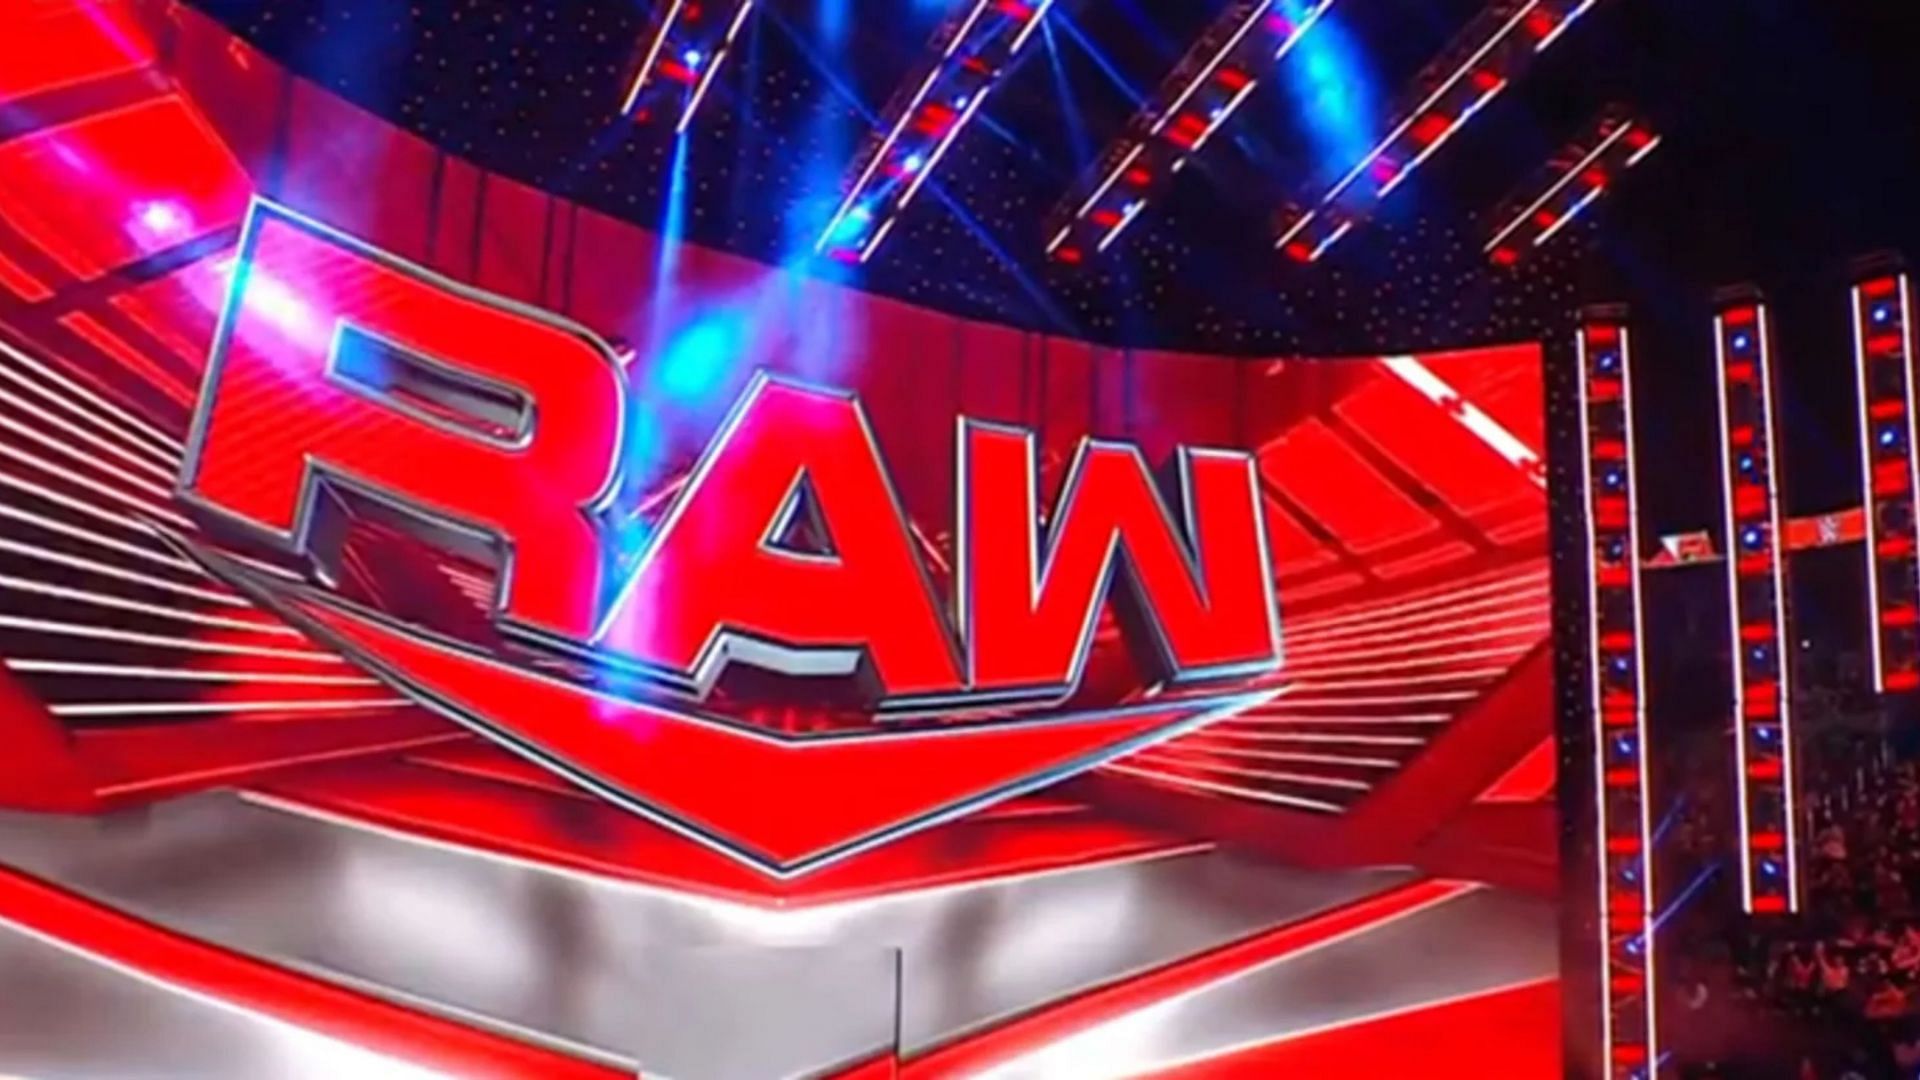 Kevin Owens is on the WWE RAW roster